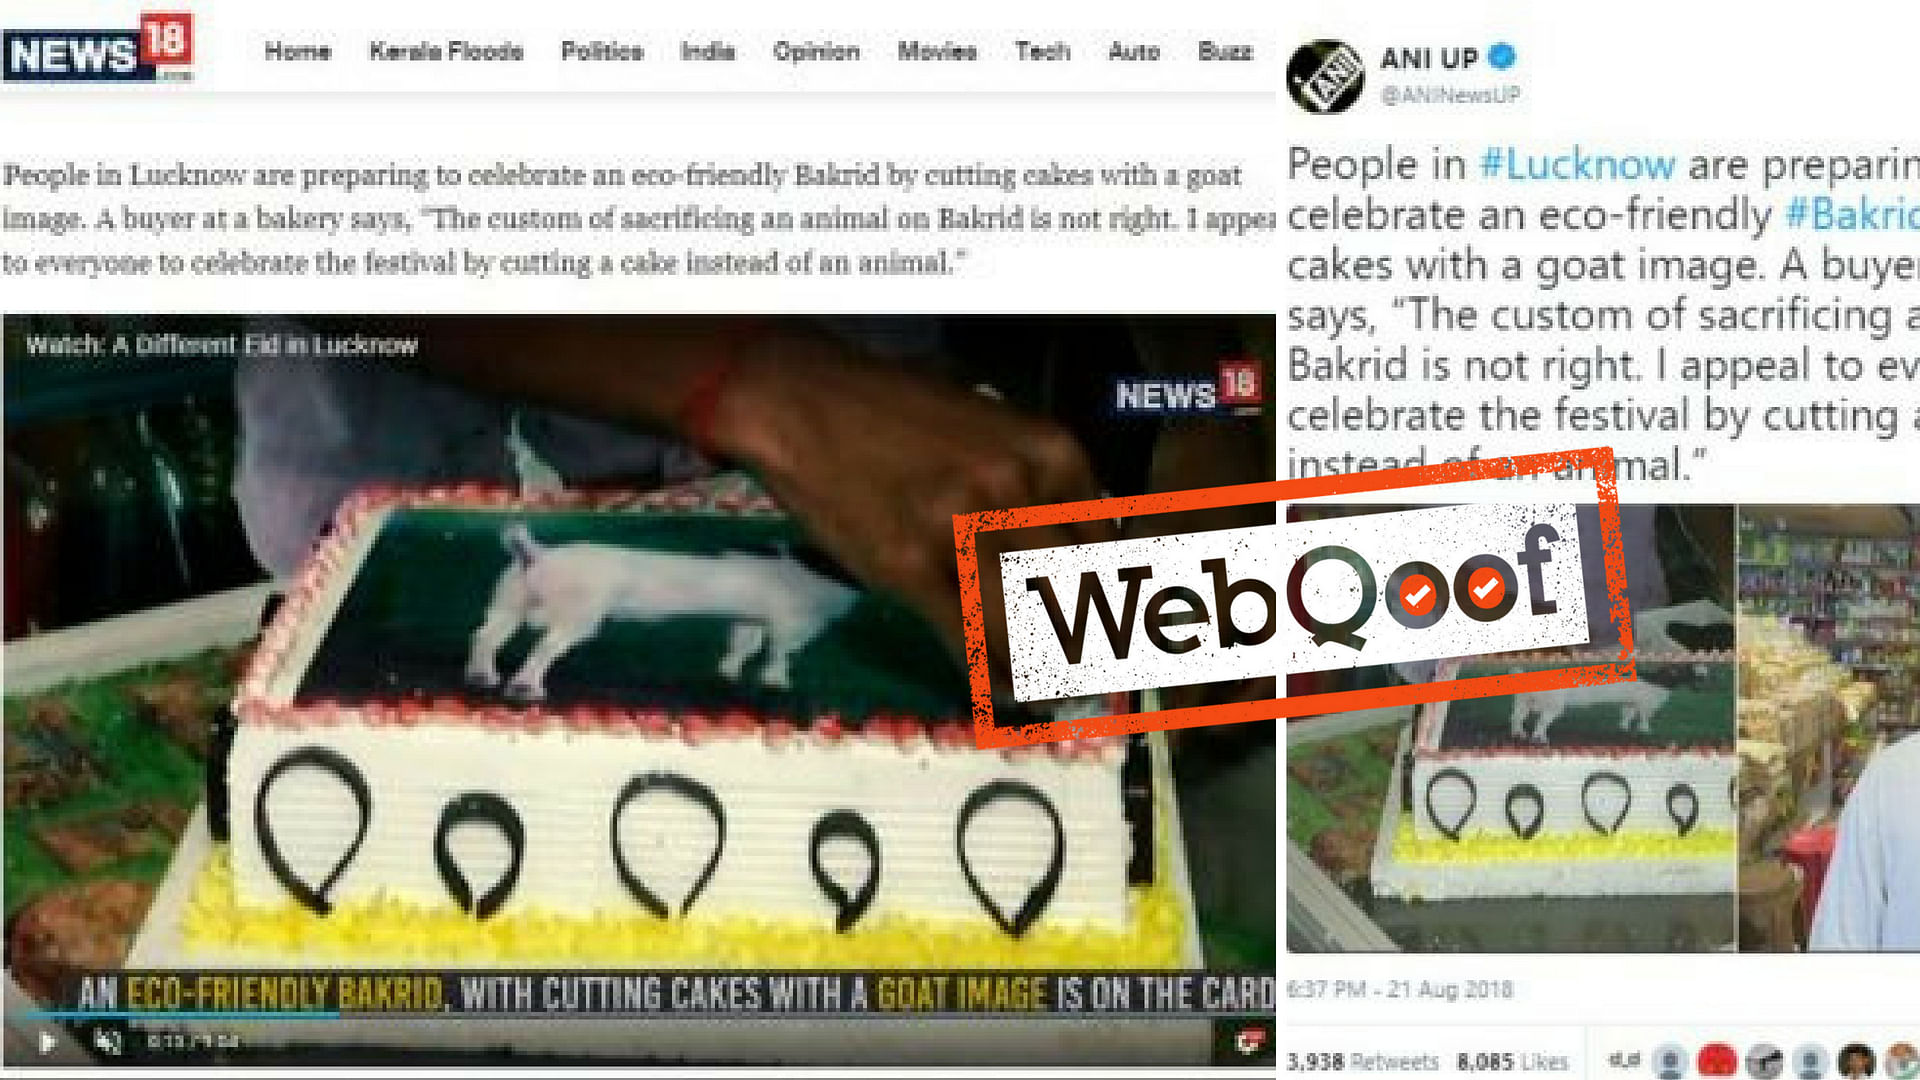 As reports of both the media outlets mentioned “people in Lucknow”, it could be inferred that many members of the Muslim community across the city decided to celebrate Bakrid by cutting a cake instead of sacrificing goats. 